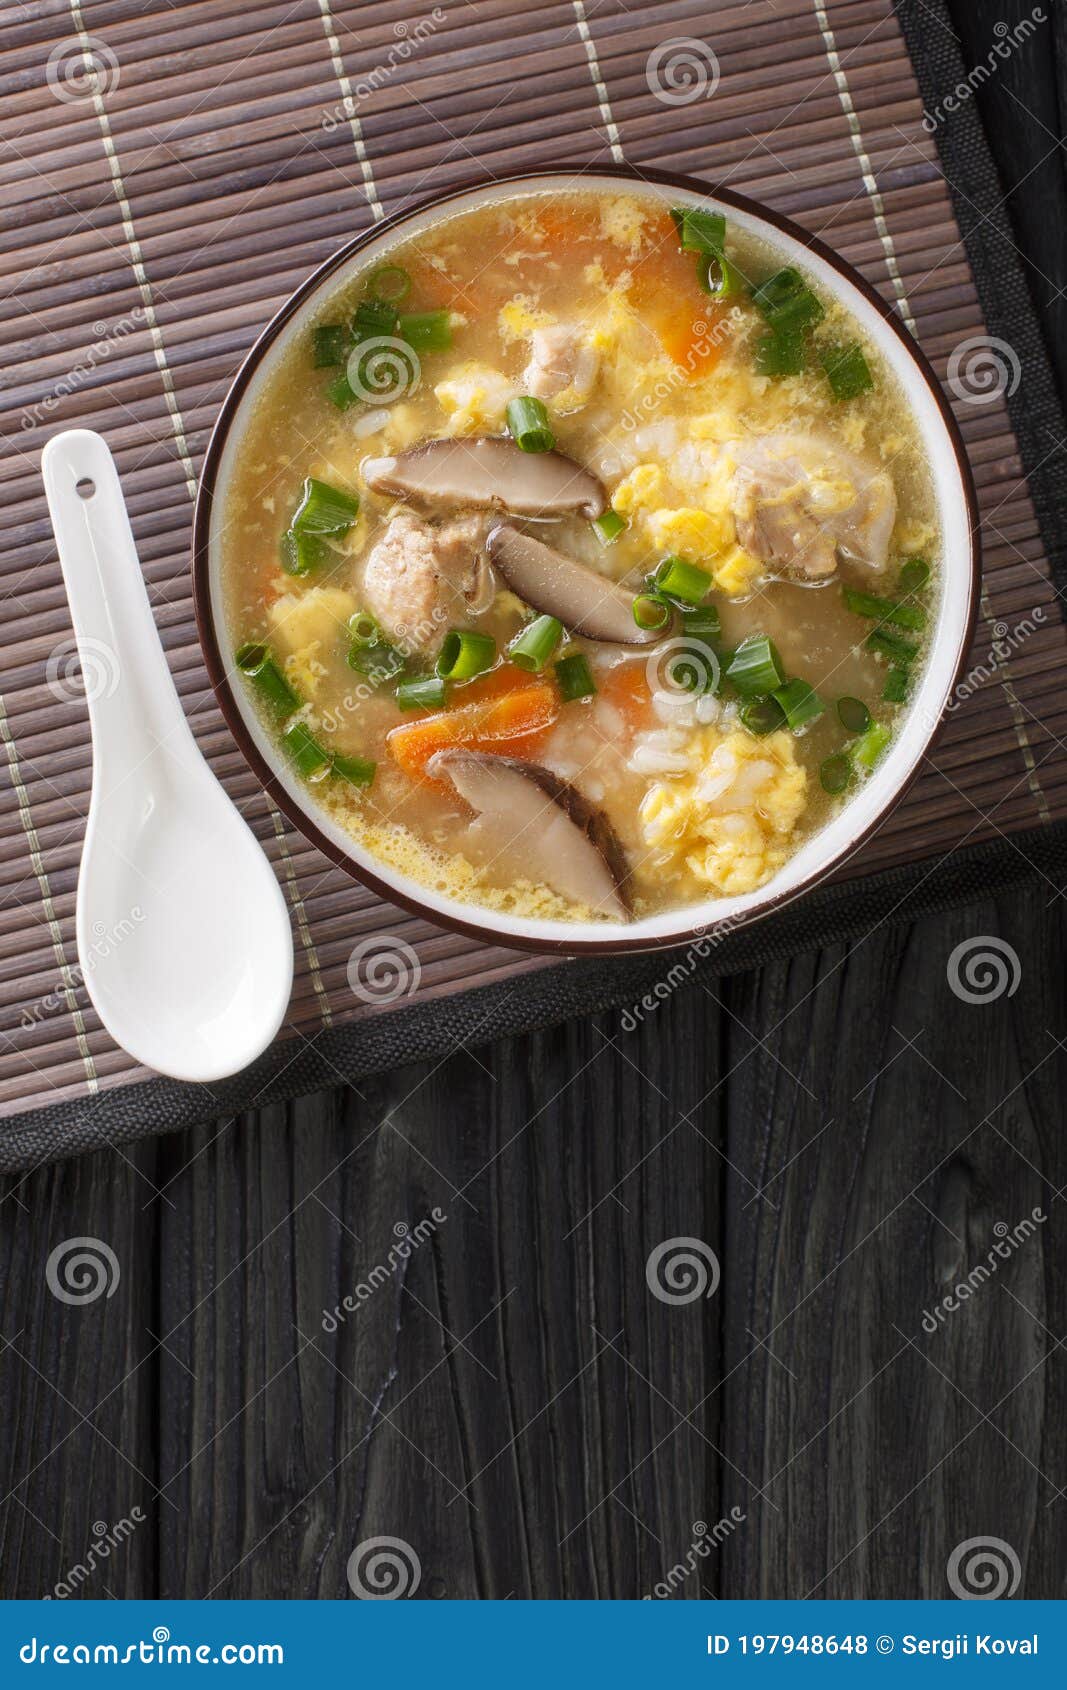 Japanese Zosui Rice Soup with Egg, Mushrooms, Vegetables and Chicken ...